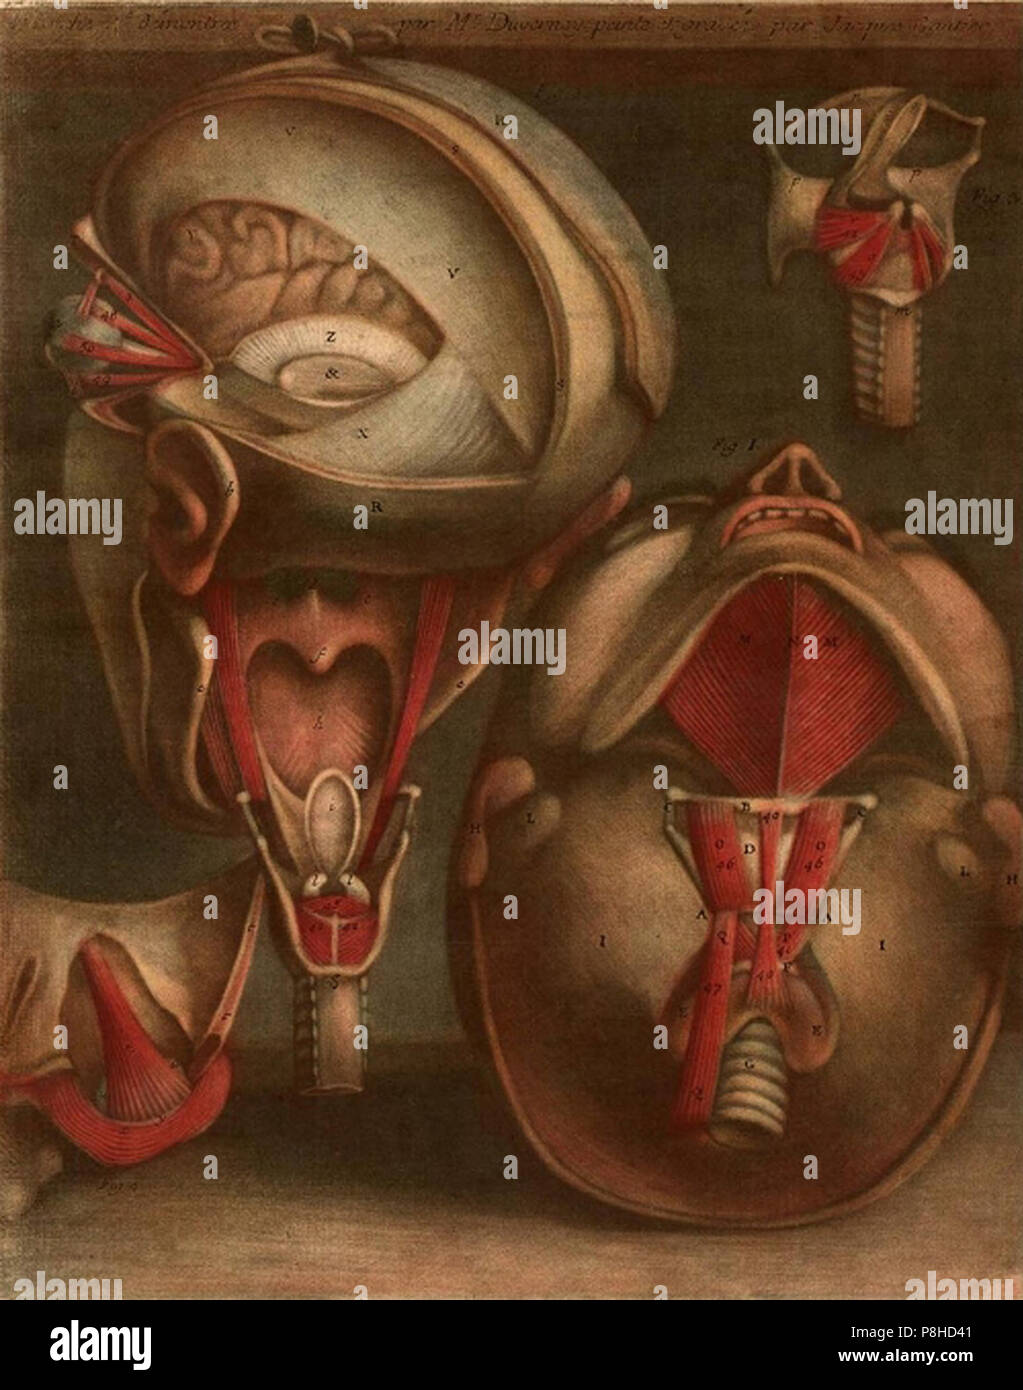 vintage anatomical drawings of a human head Stock Photo